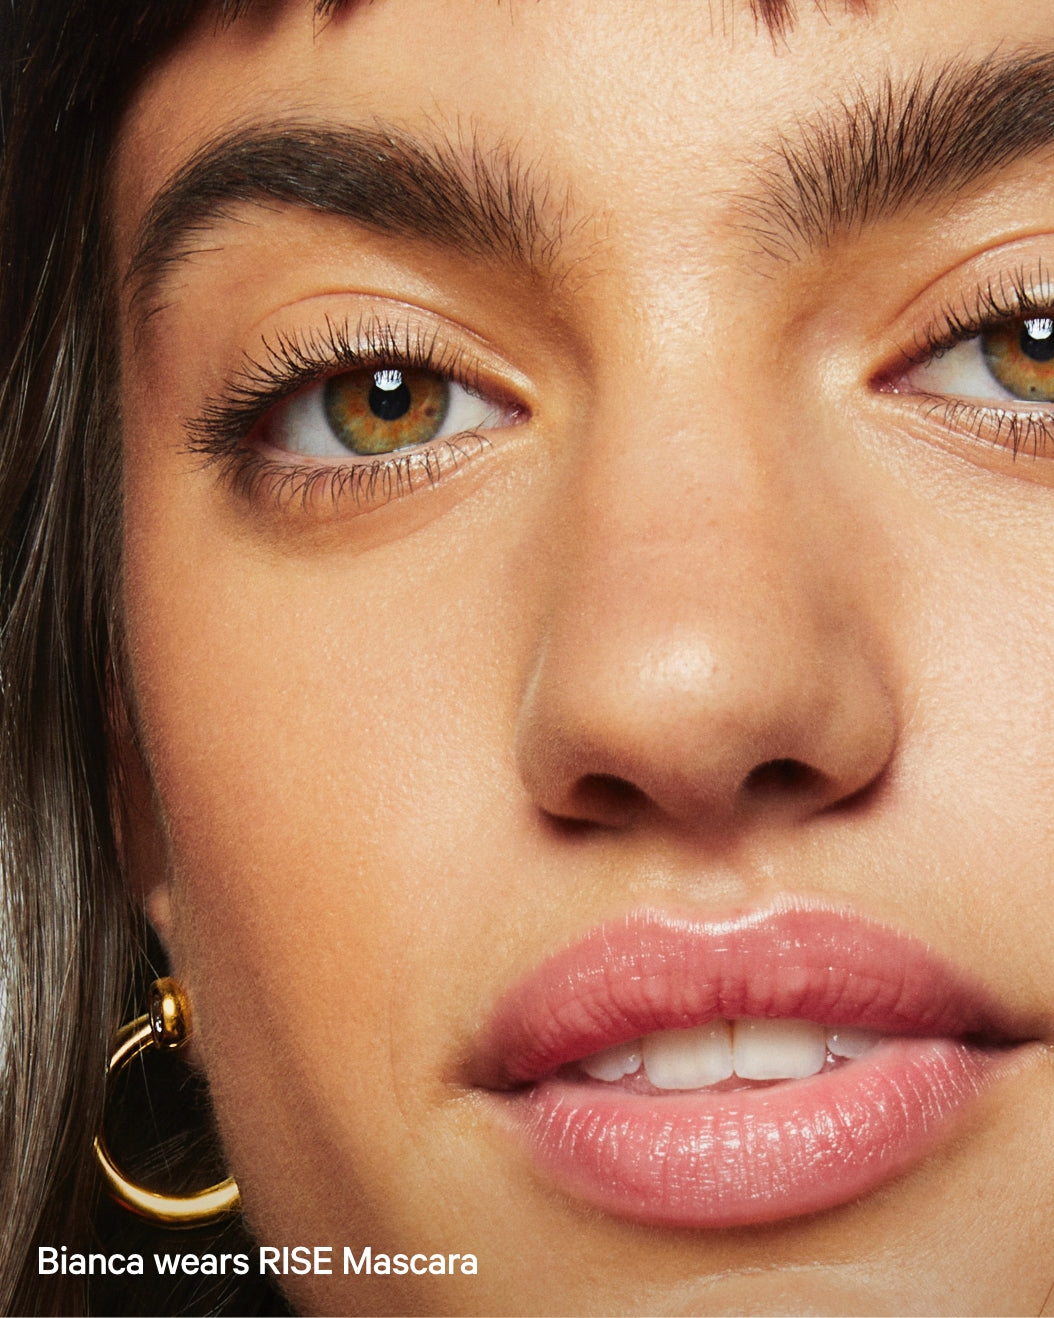 A model wears Milk Makeup RISE Mascara for long lashes